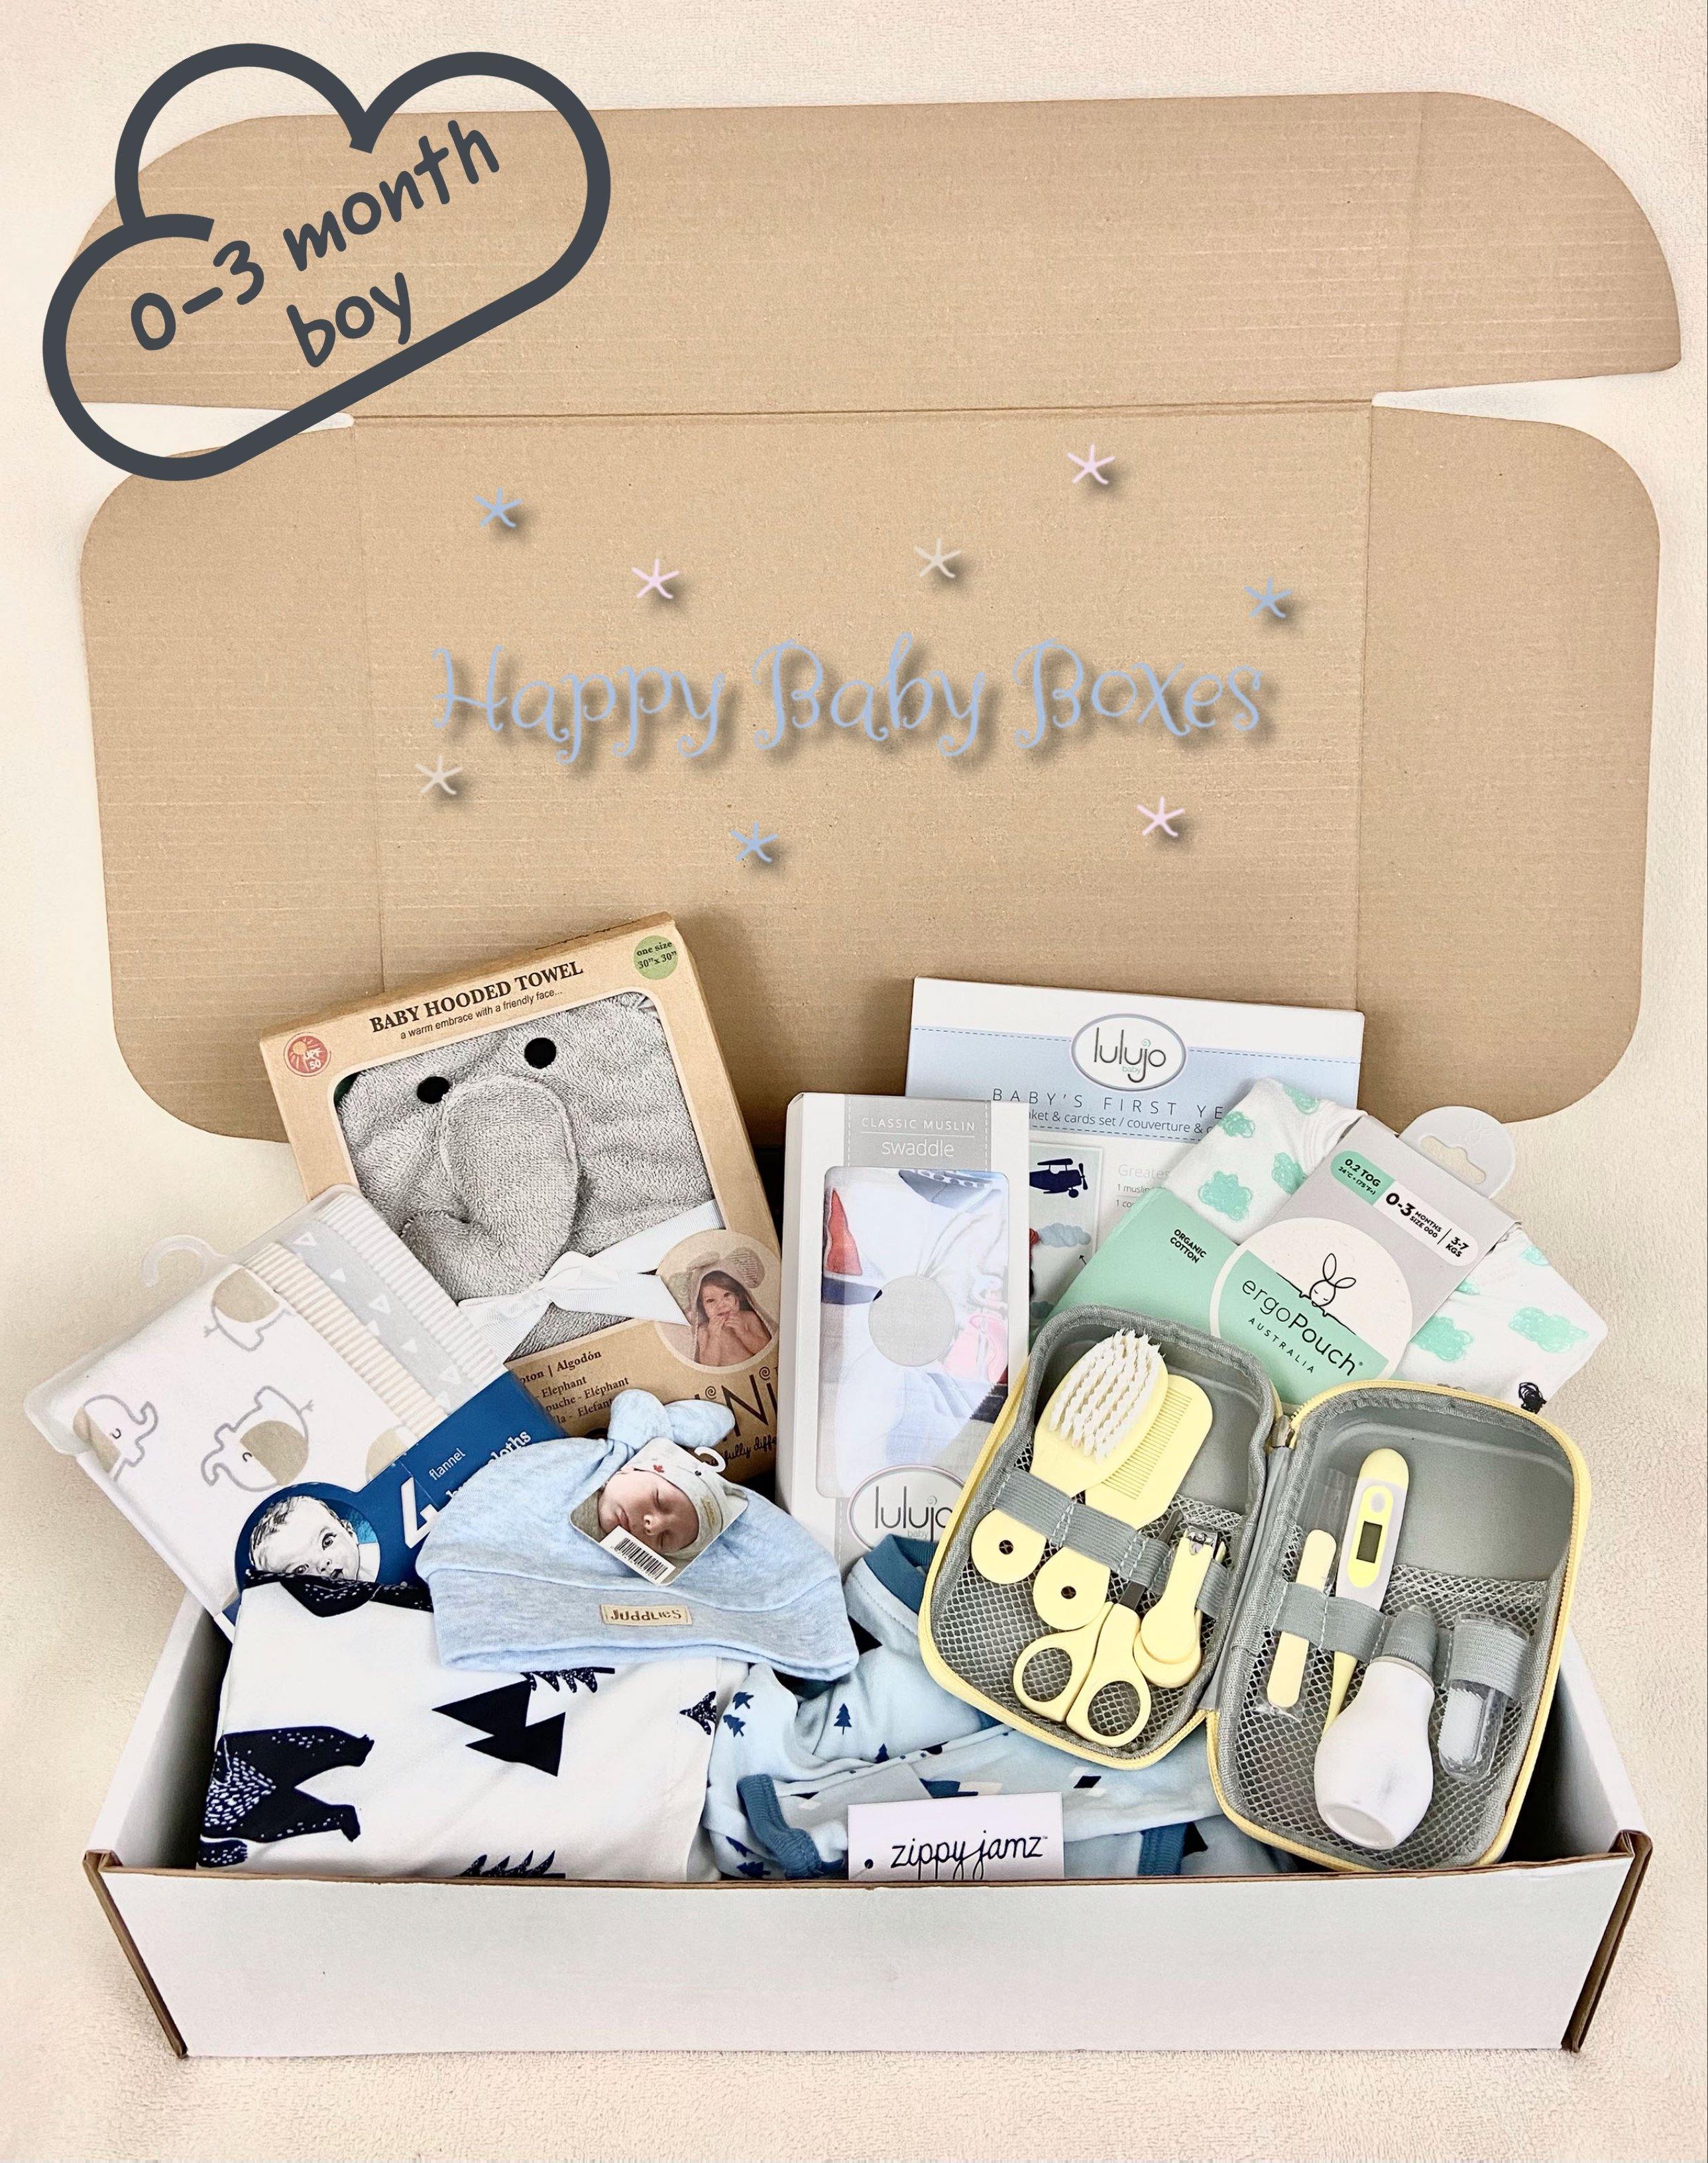 0-3 Month Baby Box - Happy Baby Boxes